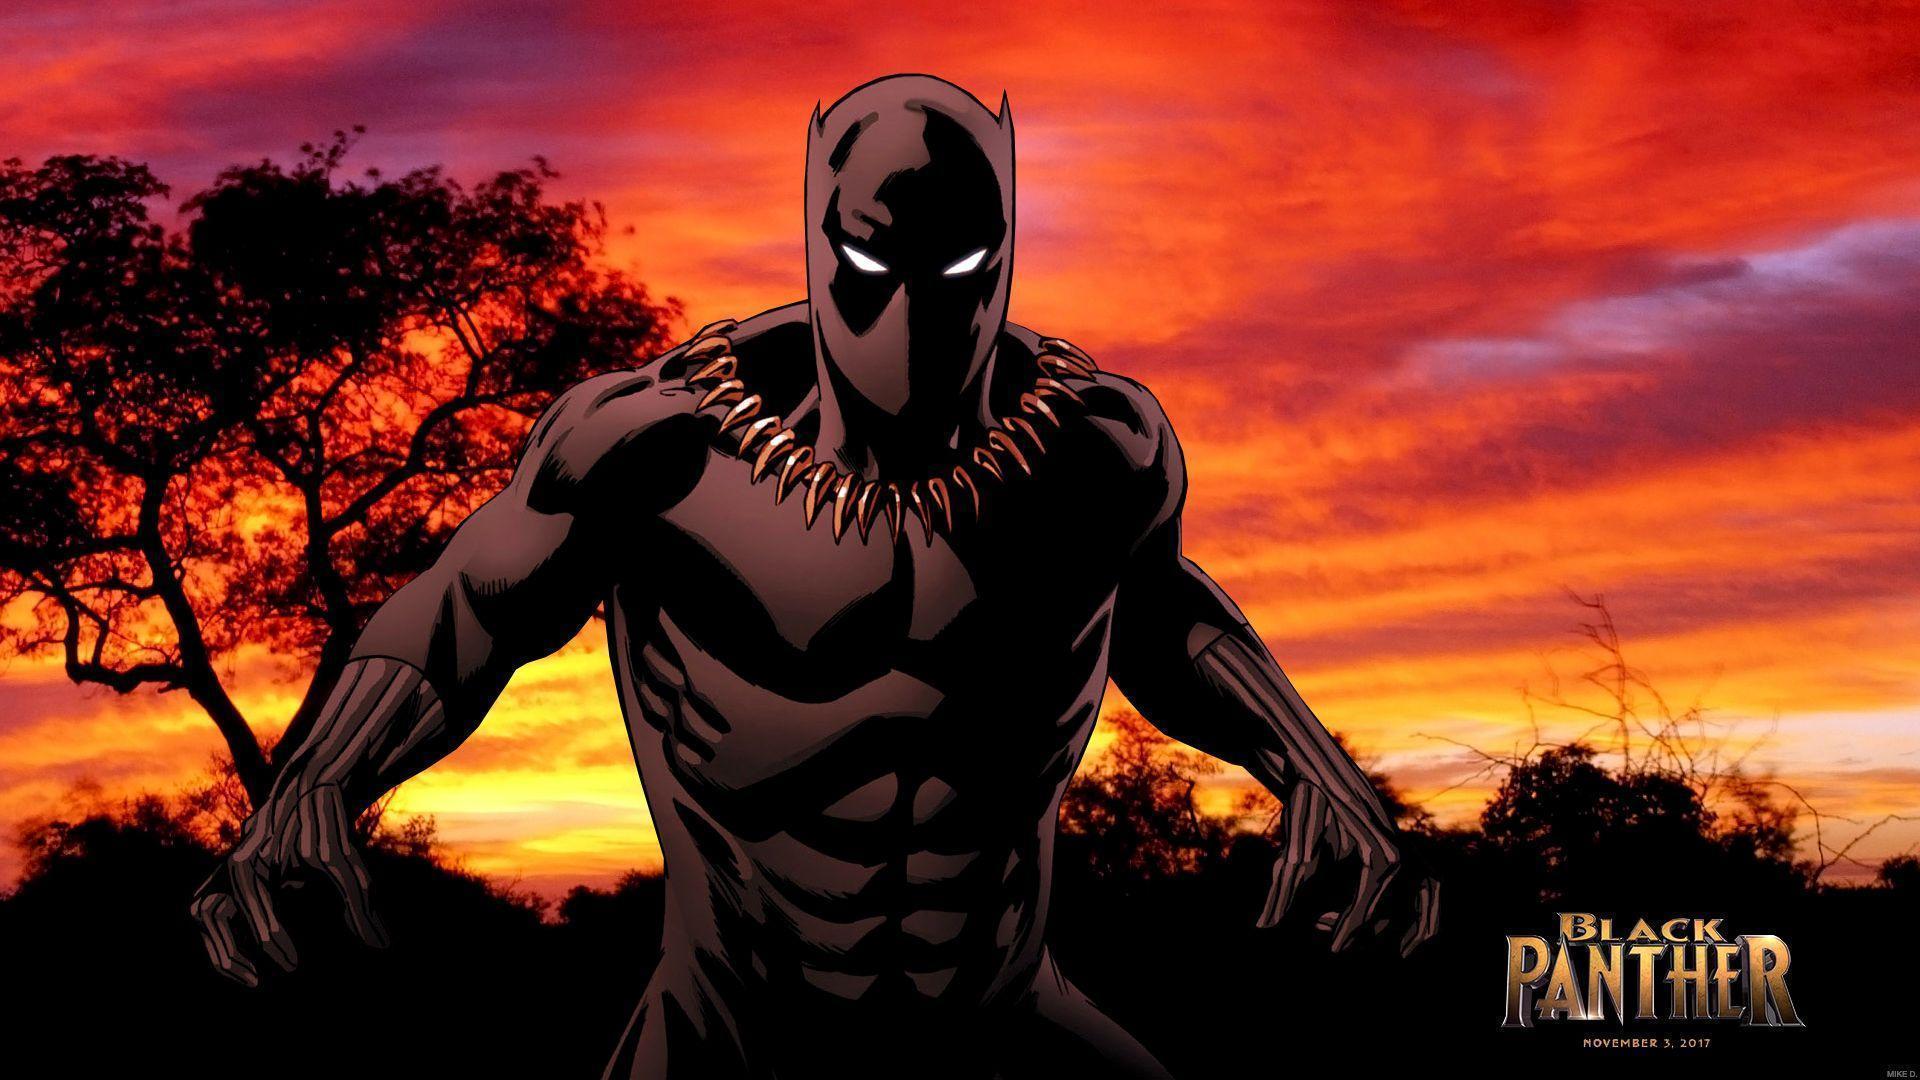 Collection of Black Panther Wallpaper Marvel on HDWallpaper